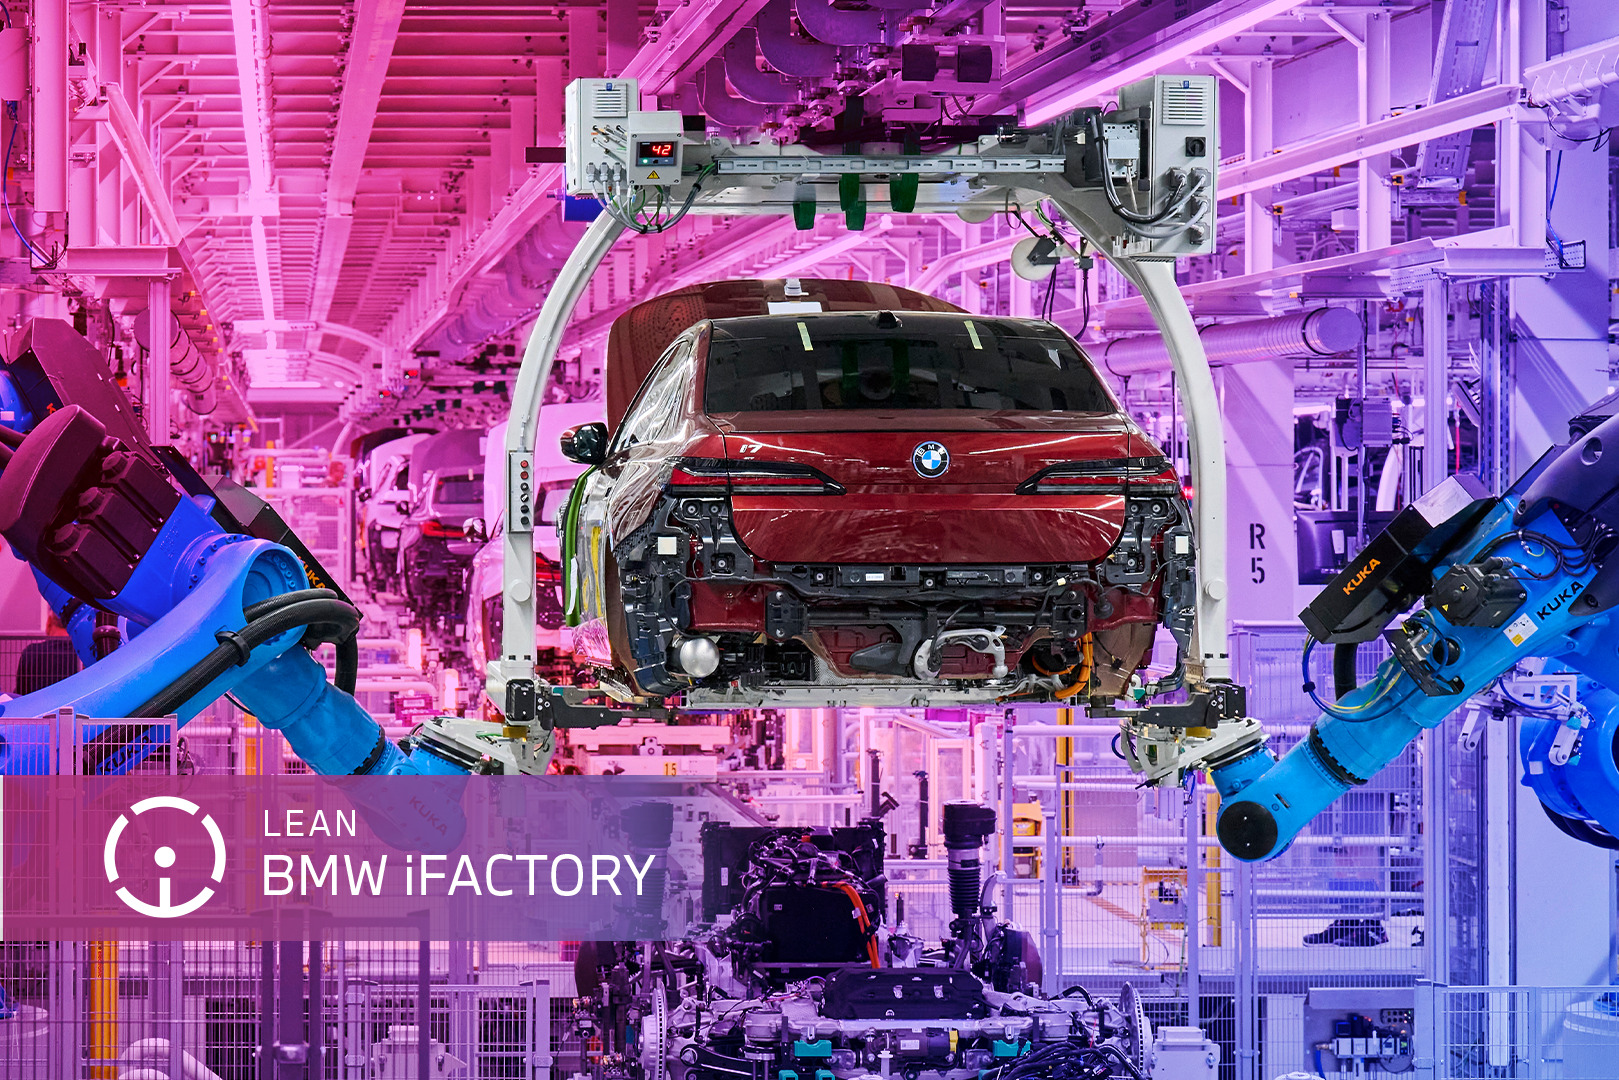 This is how LEAN the BMW <span class="grp-lowercase">i</span>FACTORY is.